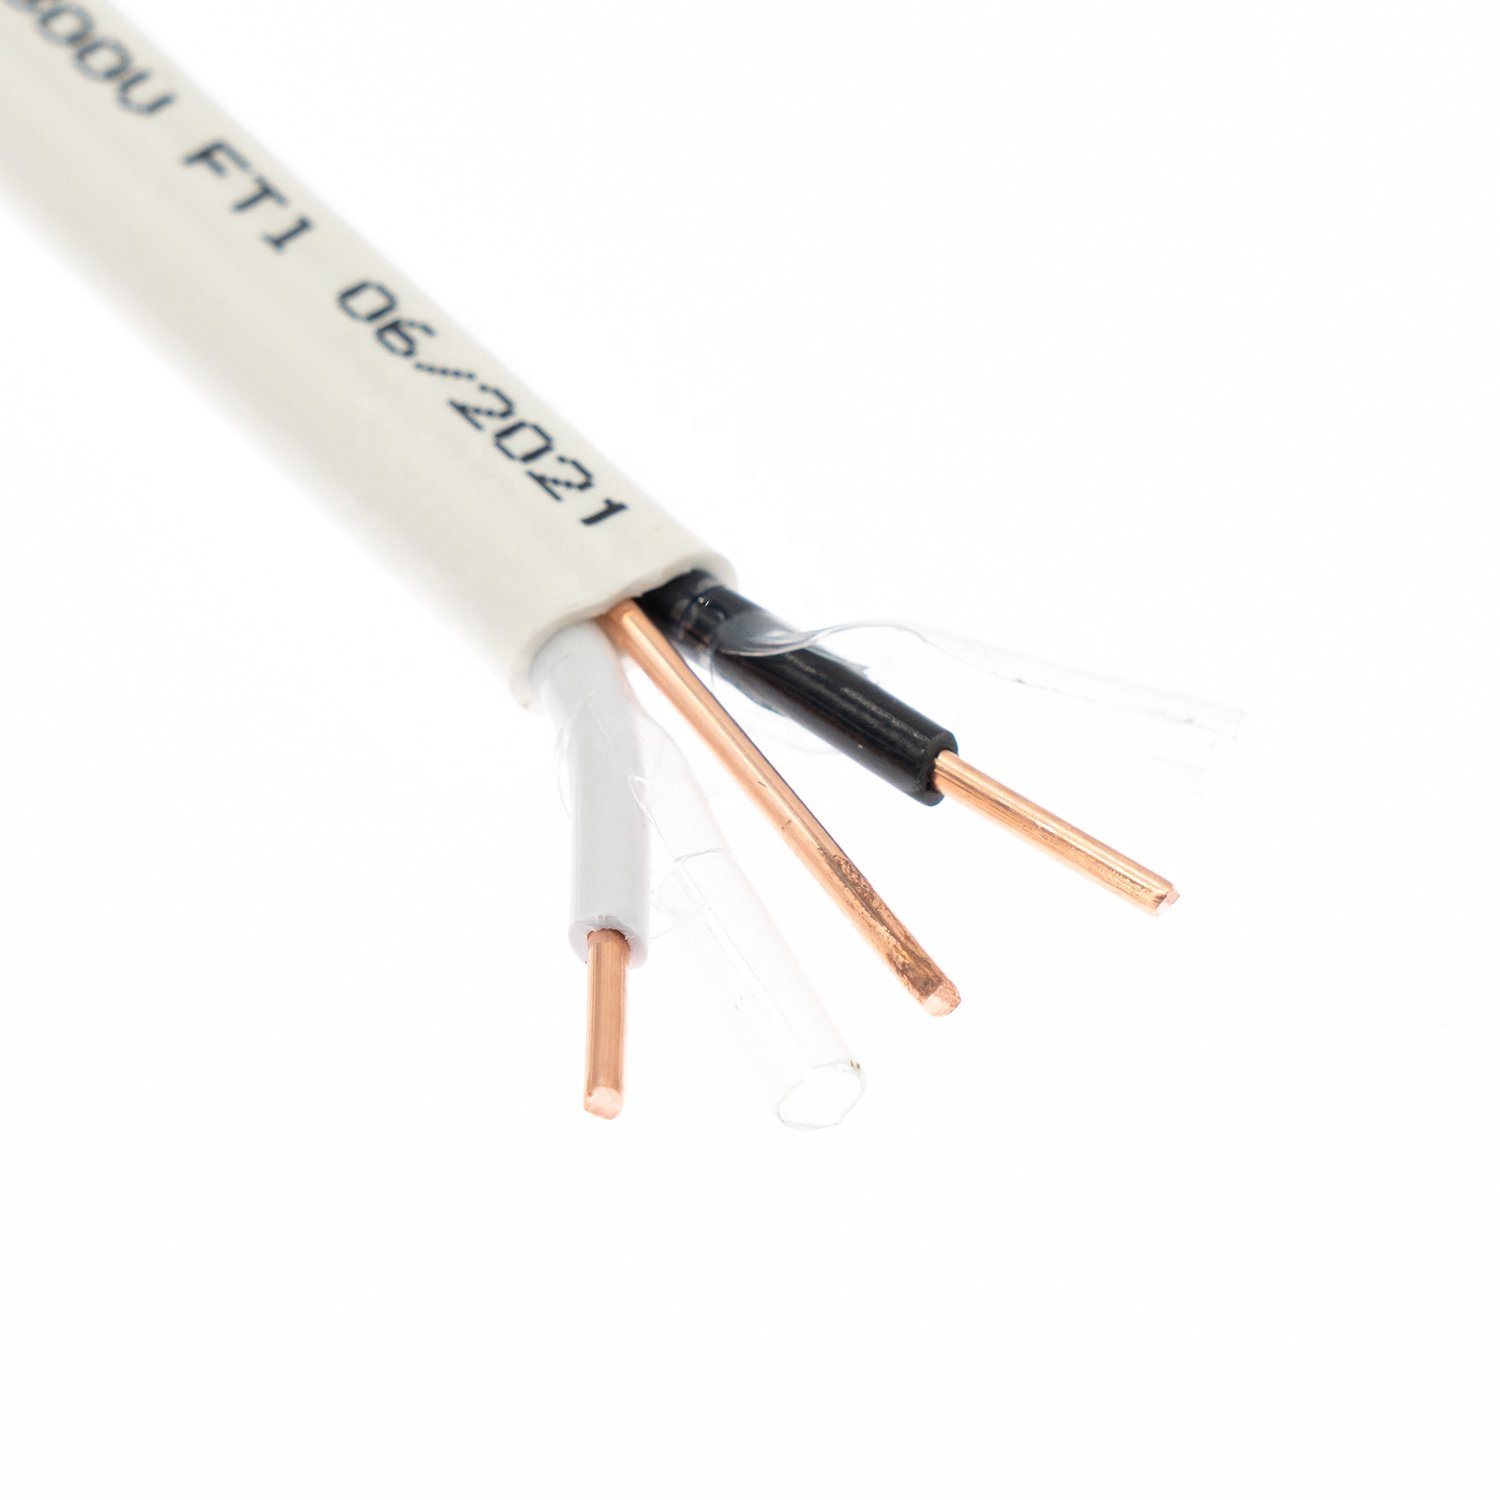 CSA Approval Canadian Household Wire Electric Copper Building Cable 14/2 14/3 12/2 12/3